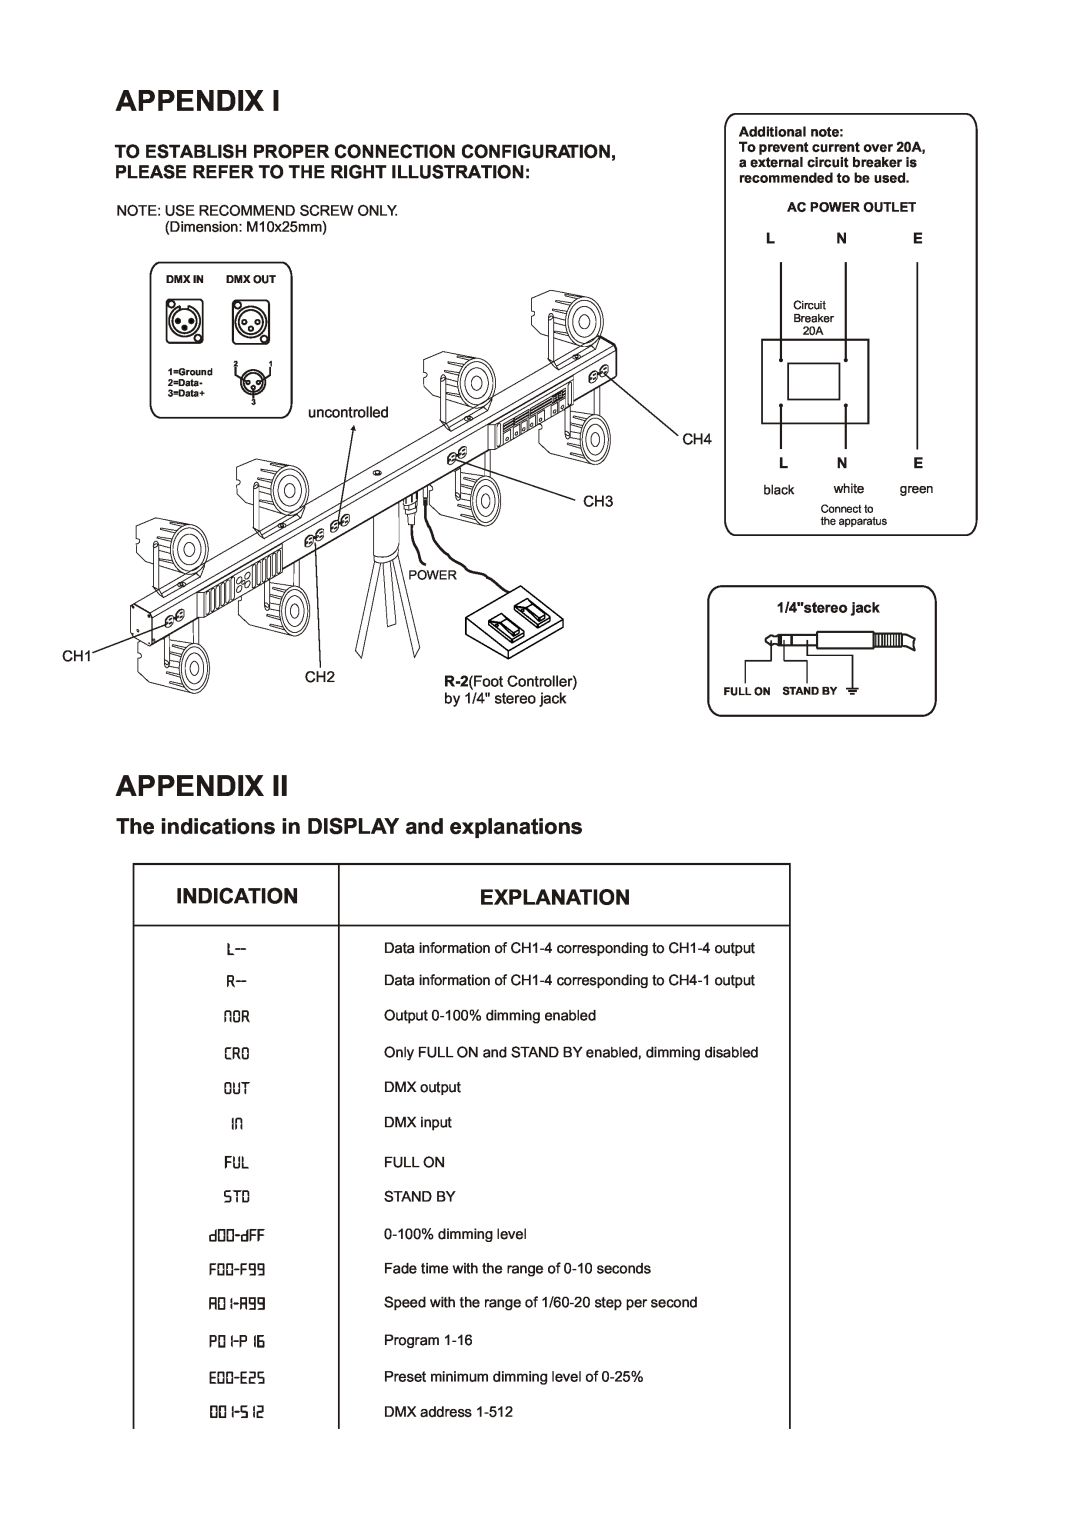 American DJ Bar-T-Cue Appendix, Indication, The indications in DISPLAY and explanations, Explanation, E00-E25 